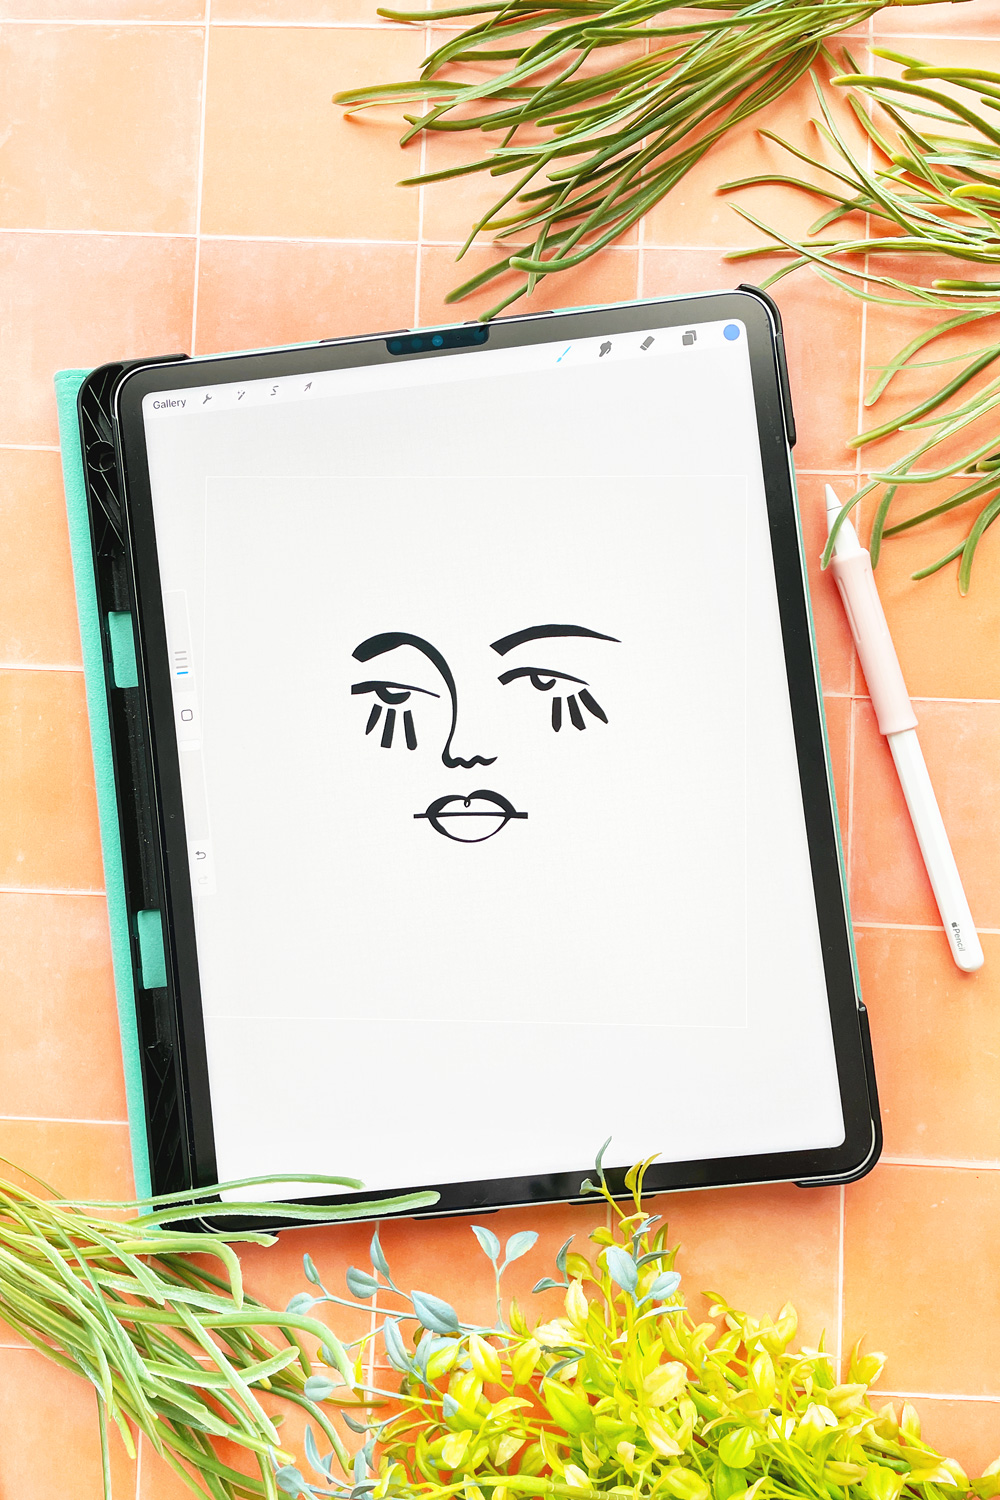 DIY Abstract Face Ring Dish - Draw an abstract face on your iPad